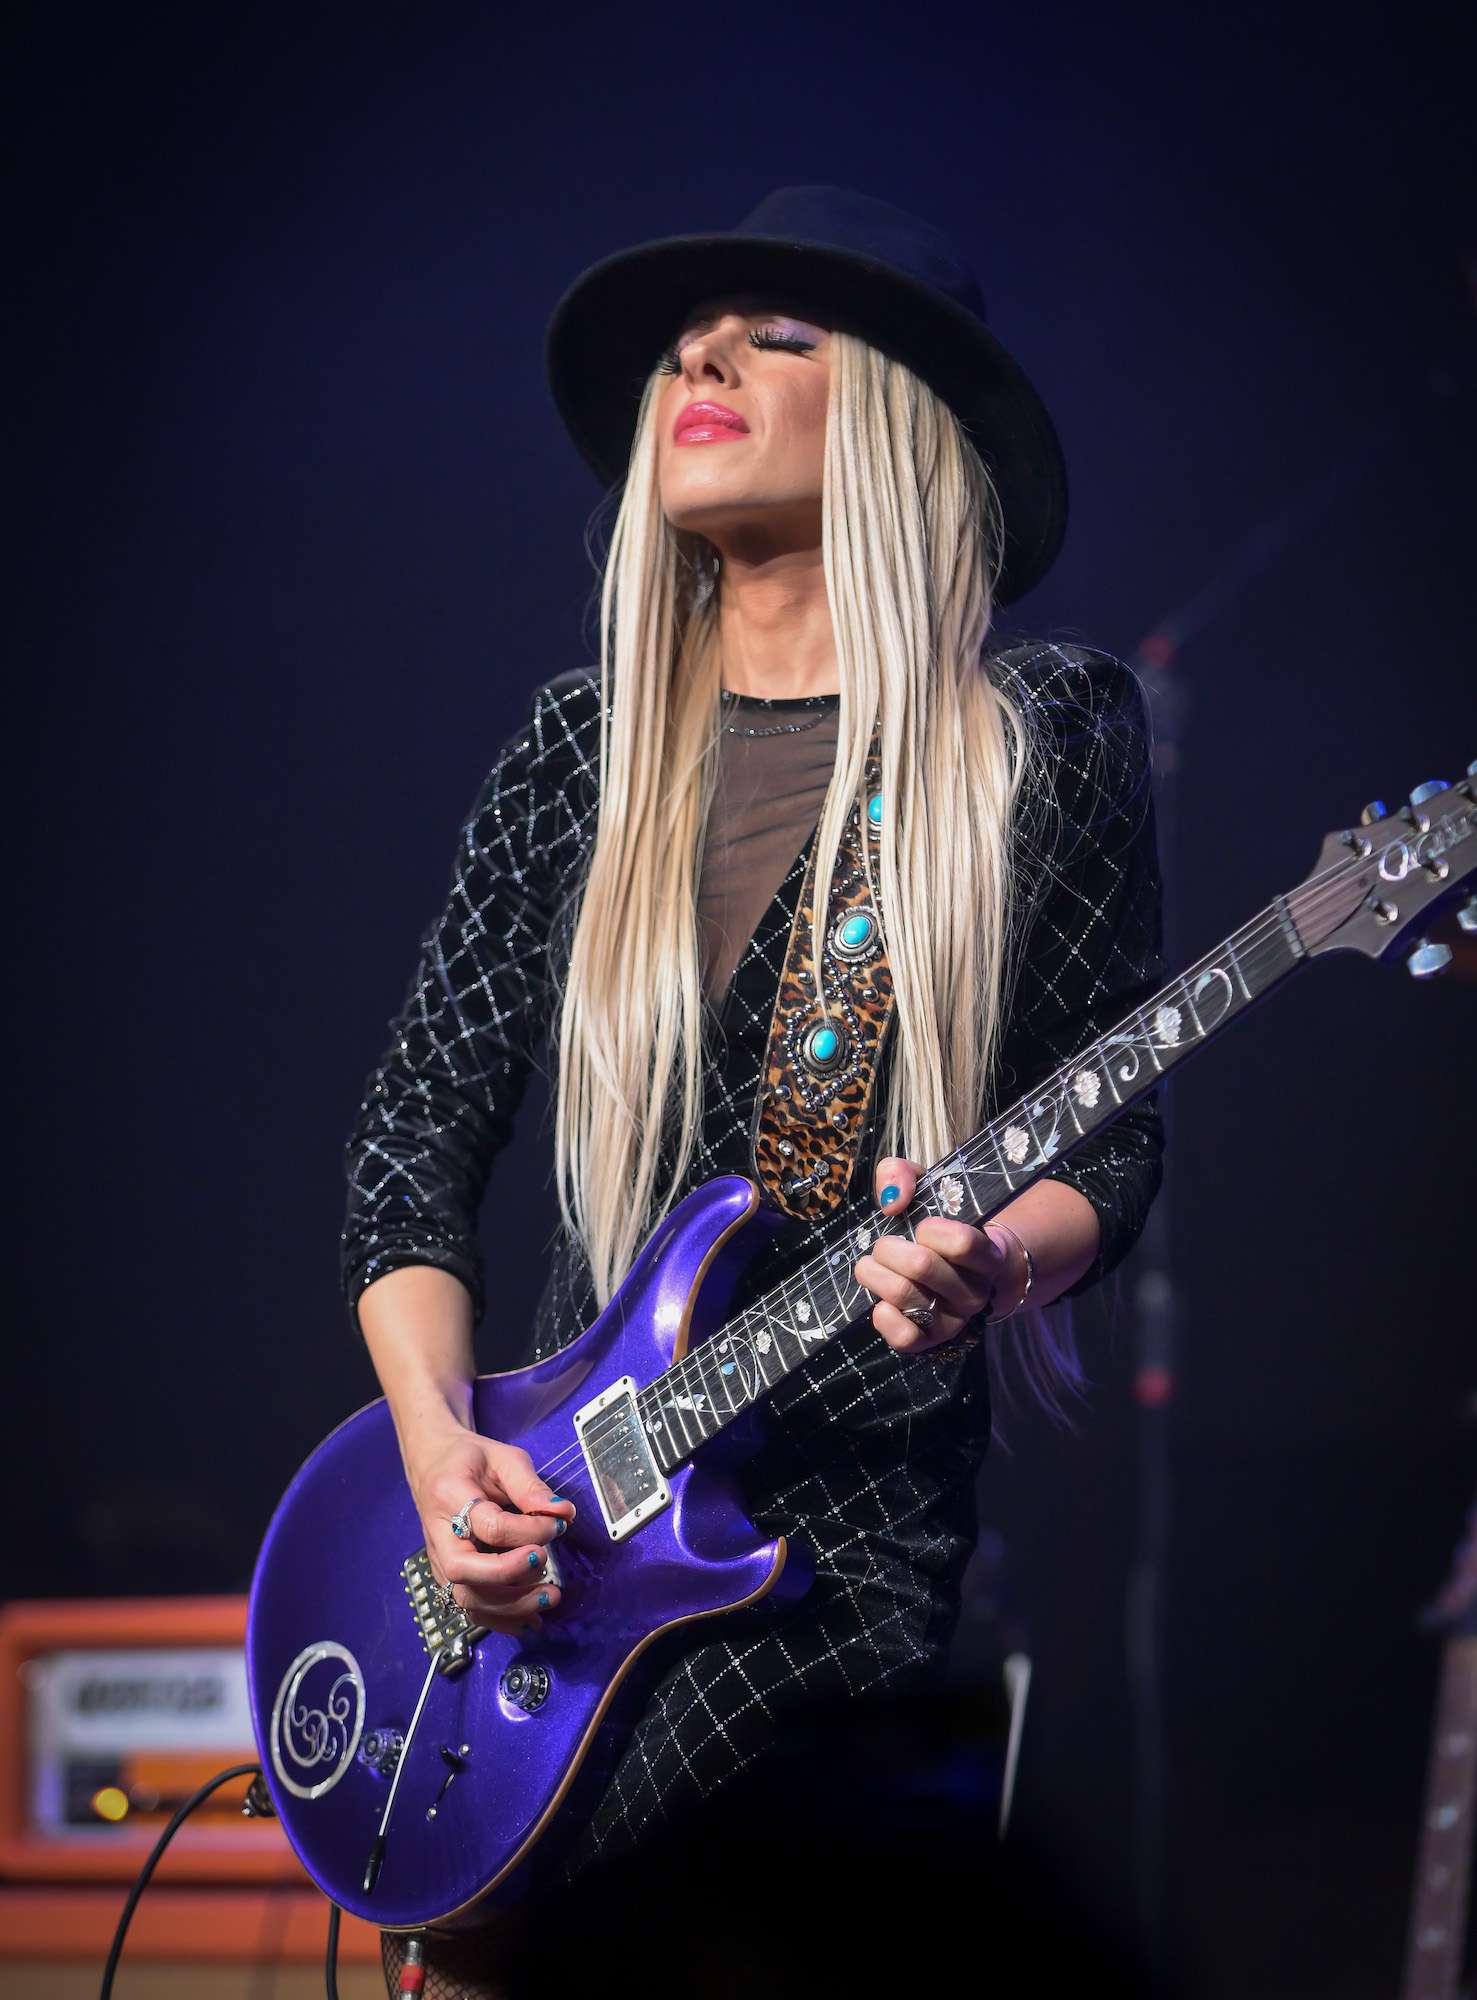 Orianthi Live at the Arcada Theatre [GALLERY] 2